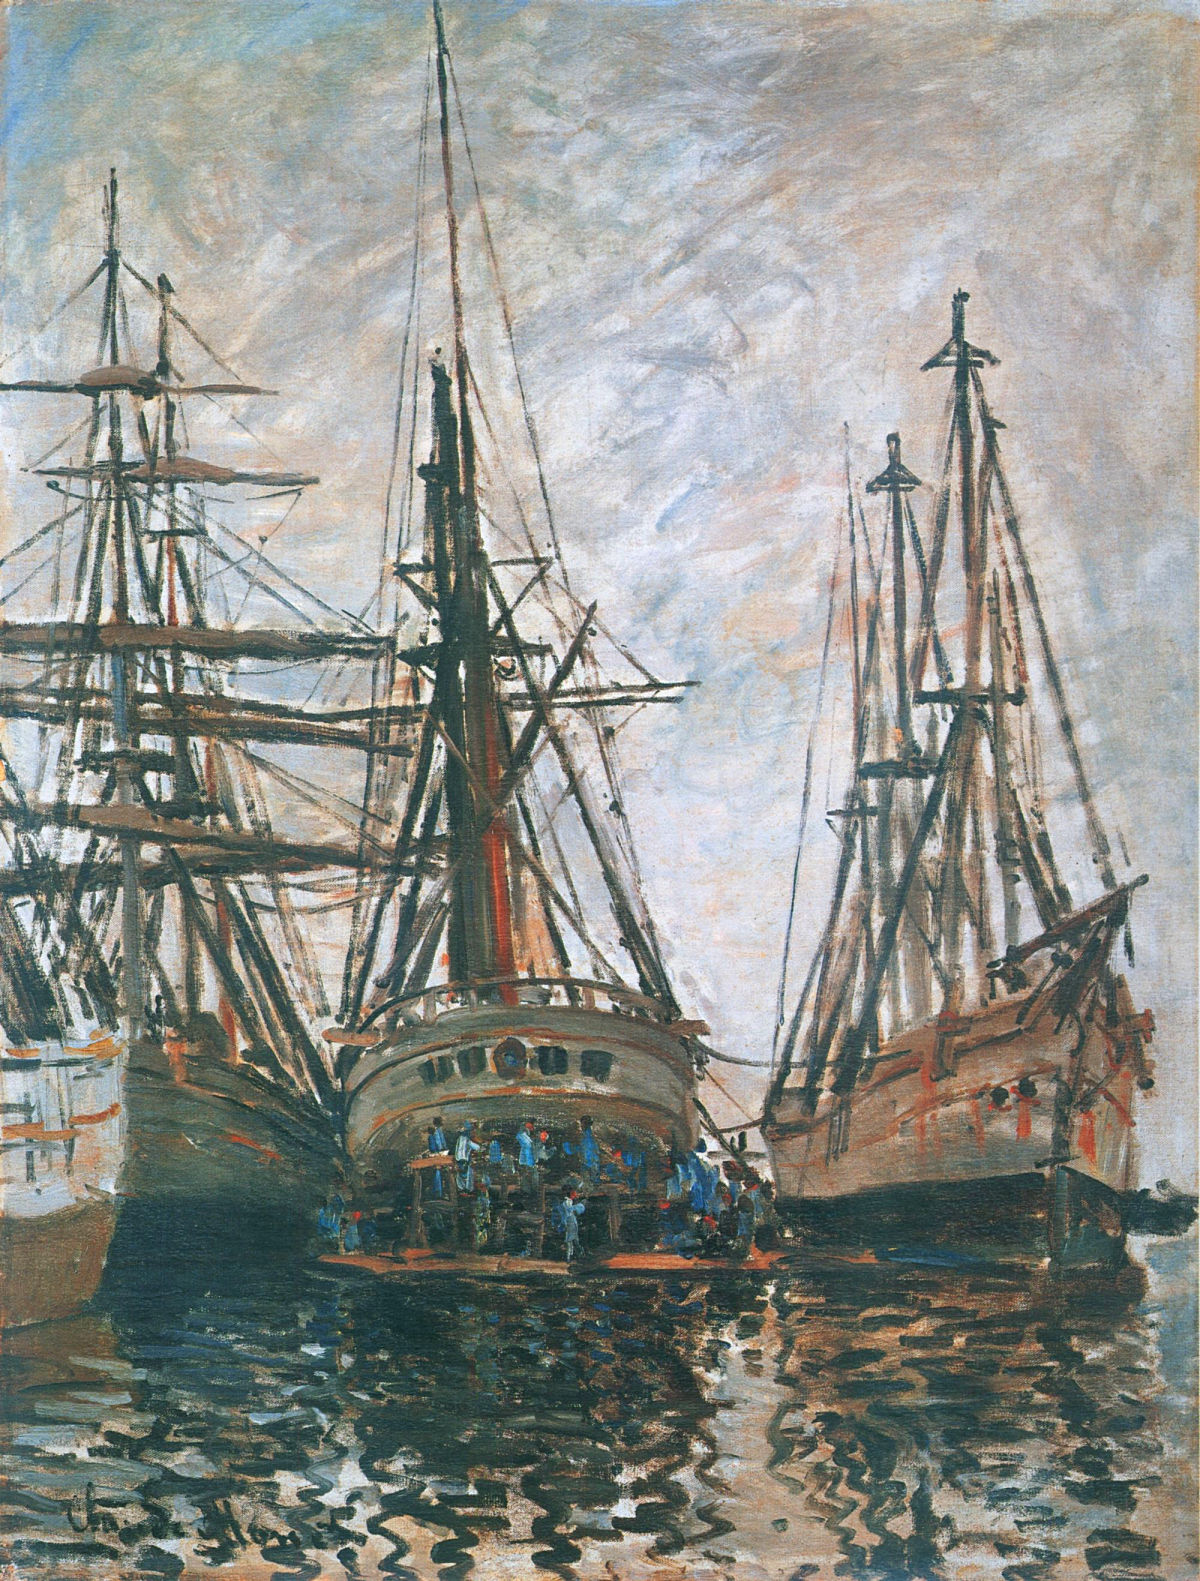 Boats on Rapair 1873